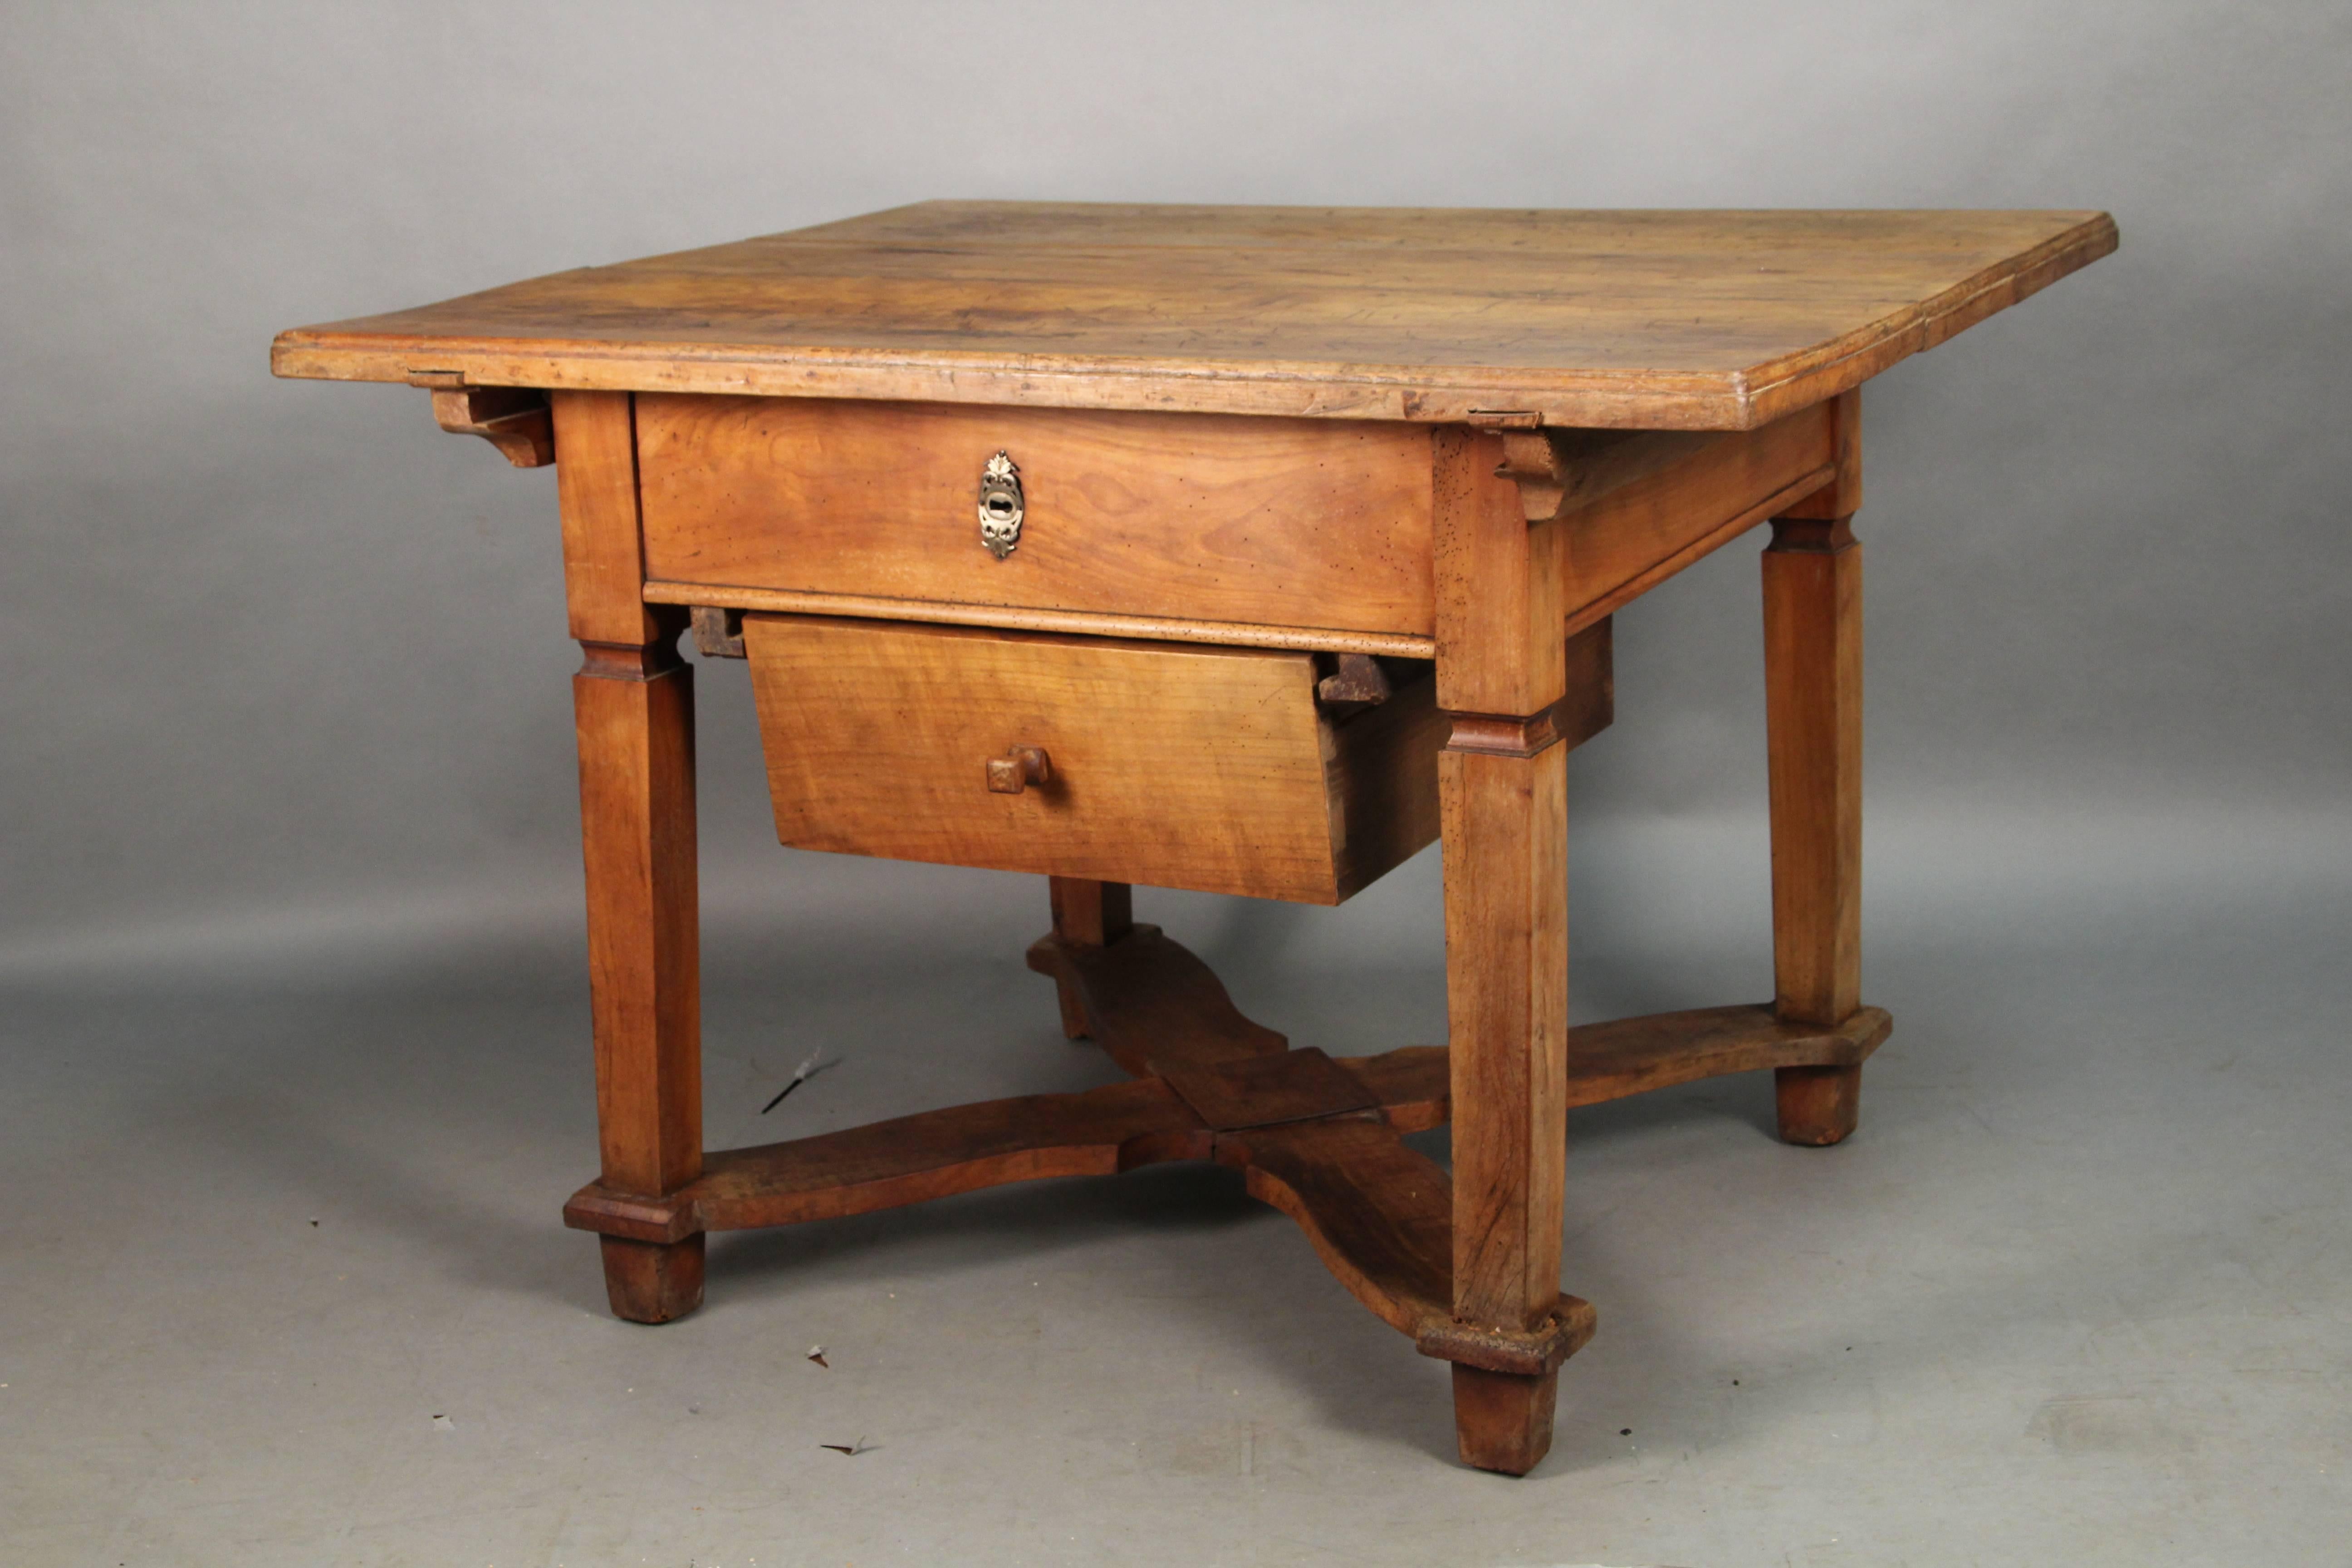 From the 1800s lovely pastry. Original finish. Would make a great kitchen island. Measures: 31